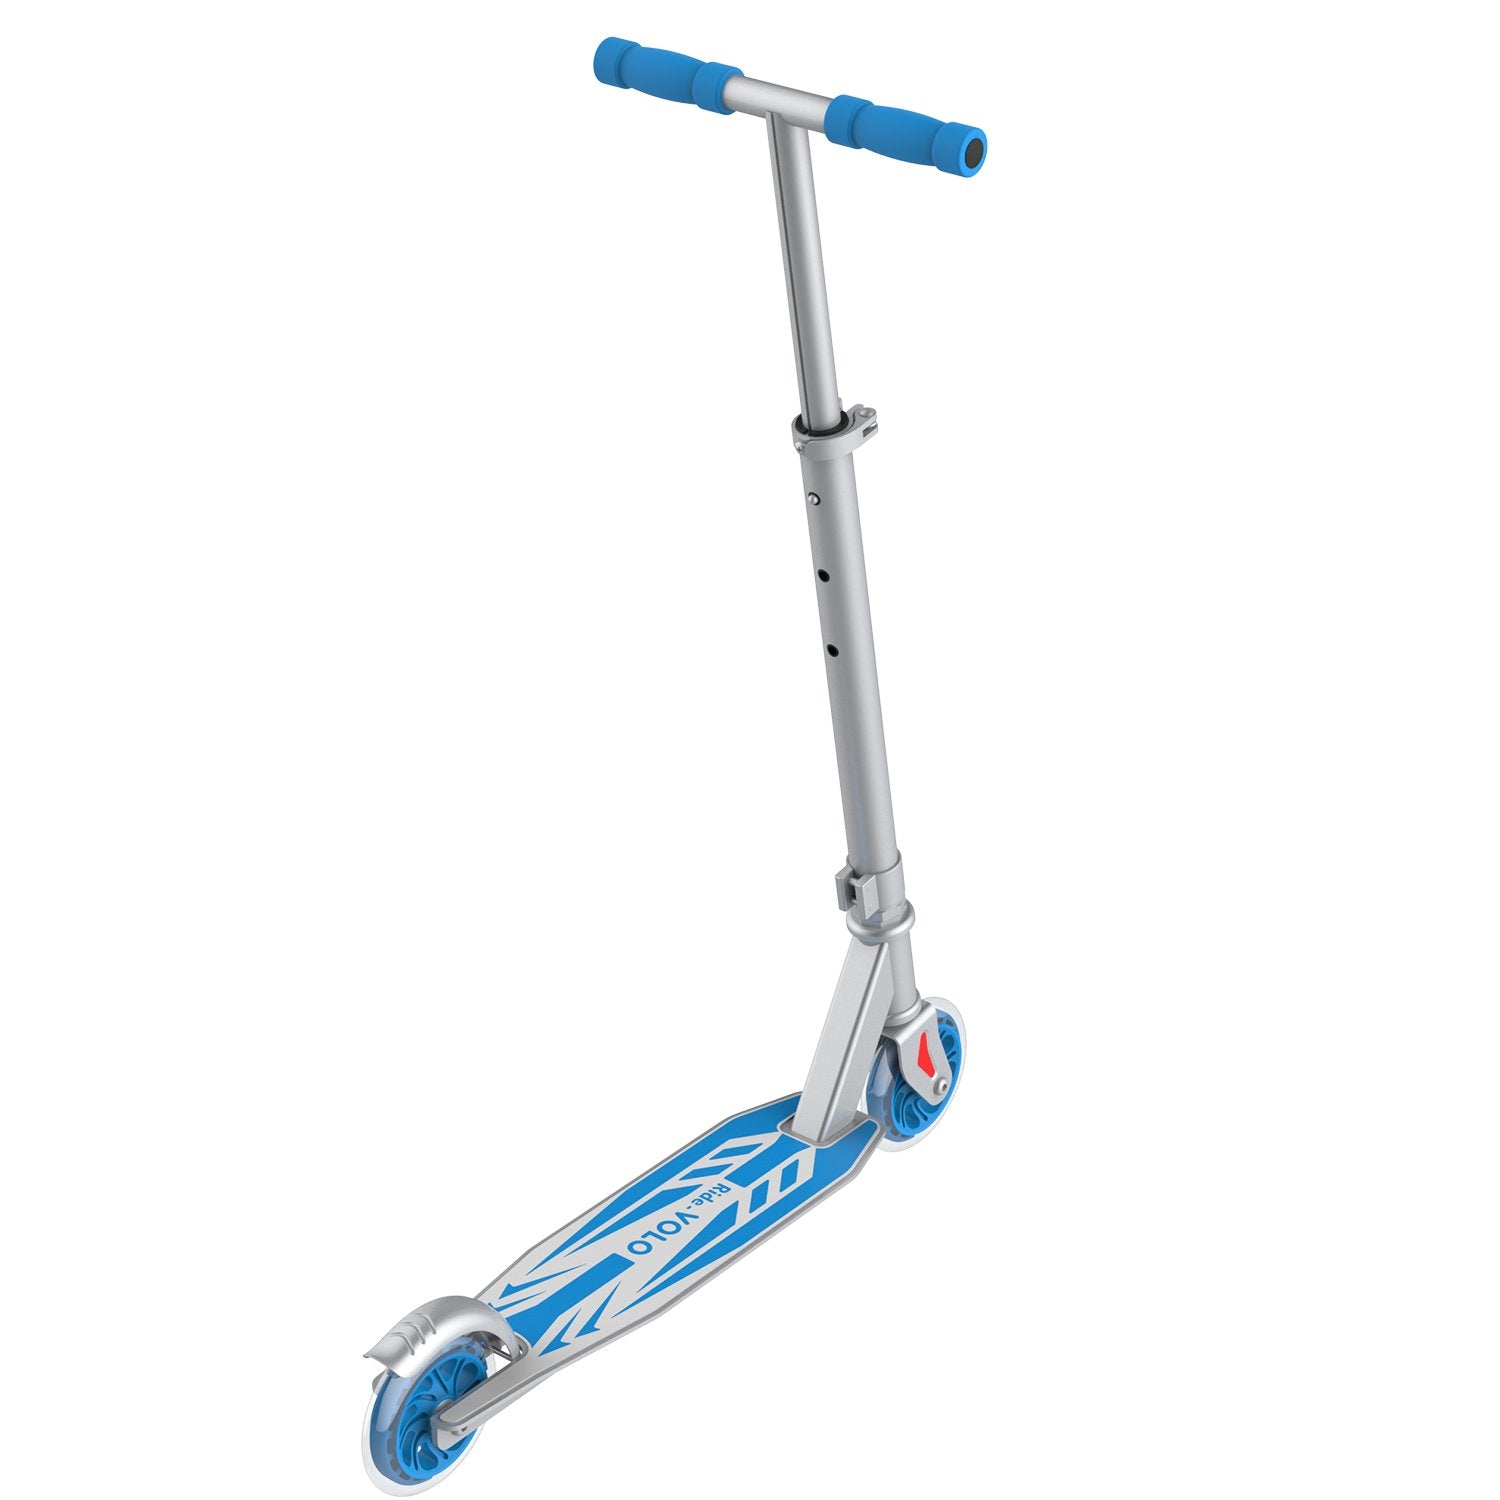 Silver k05 scooter away image